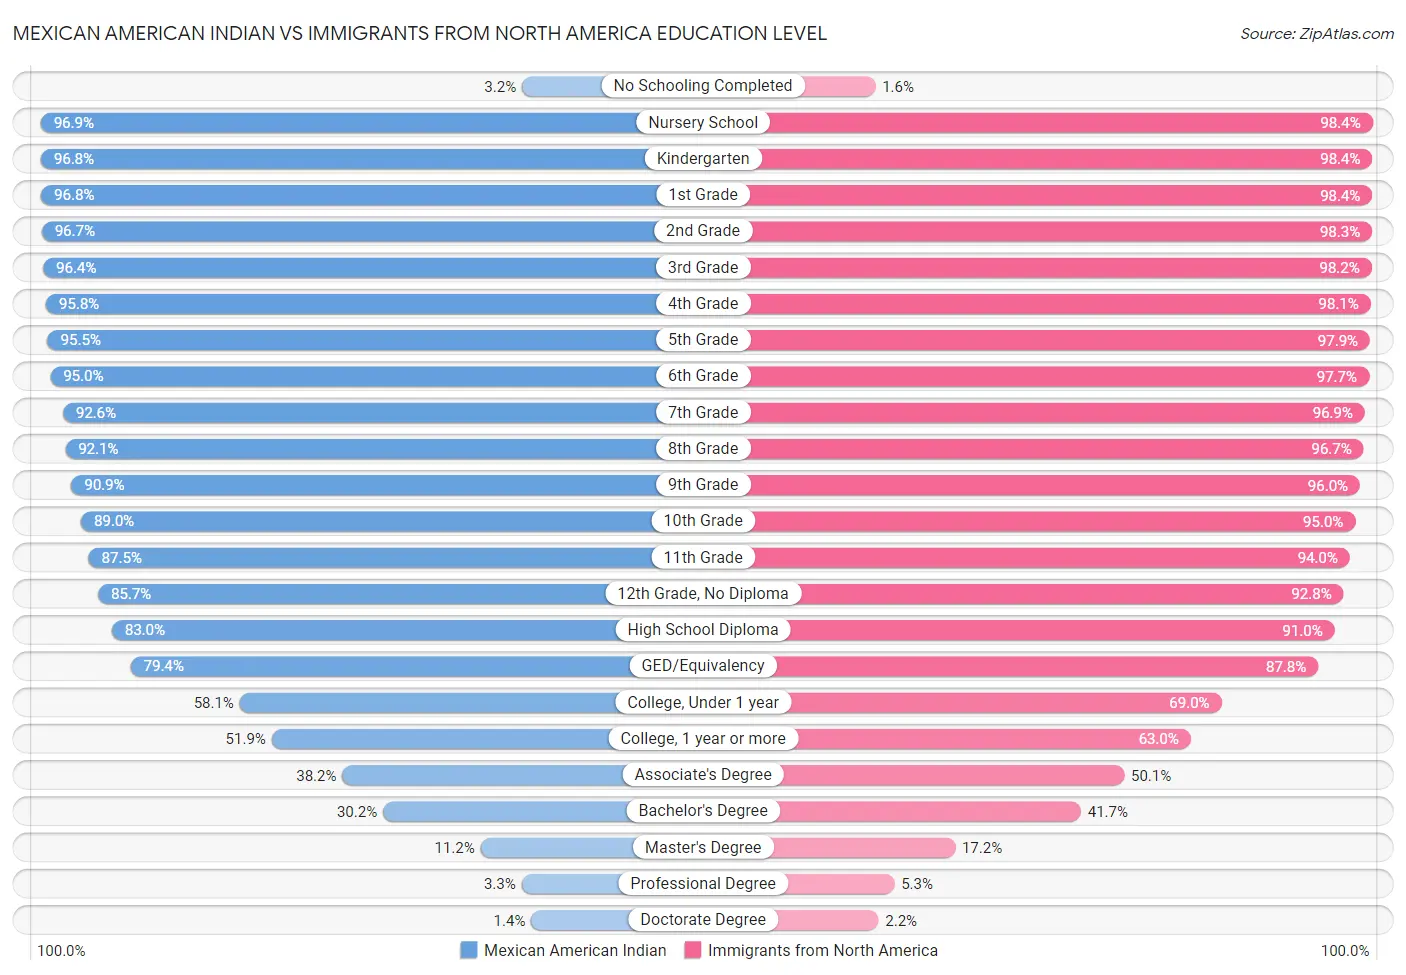 Mexican American Indian vs Immigrants from North America Education Level